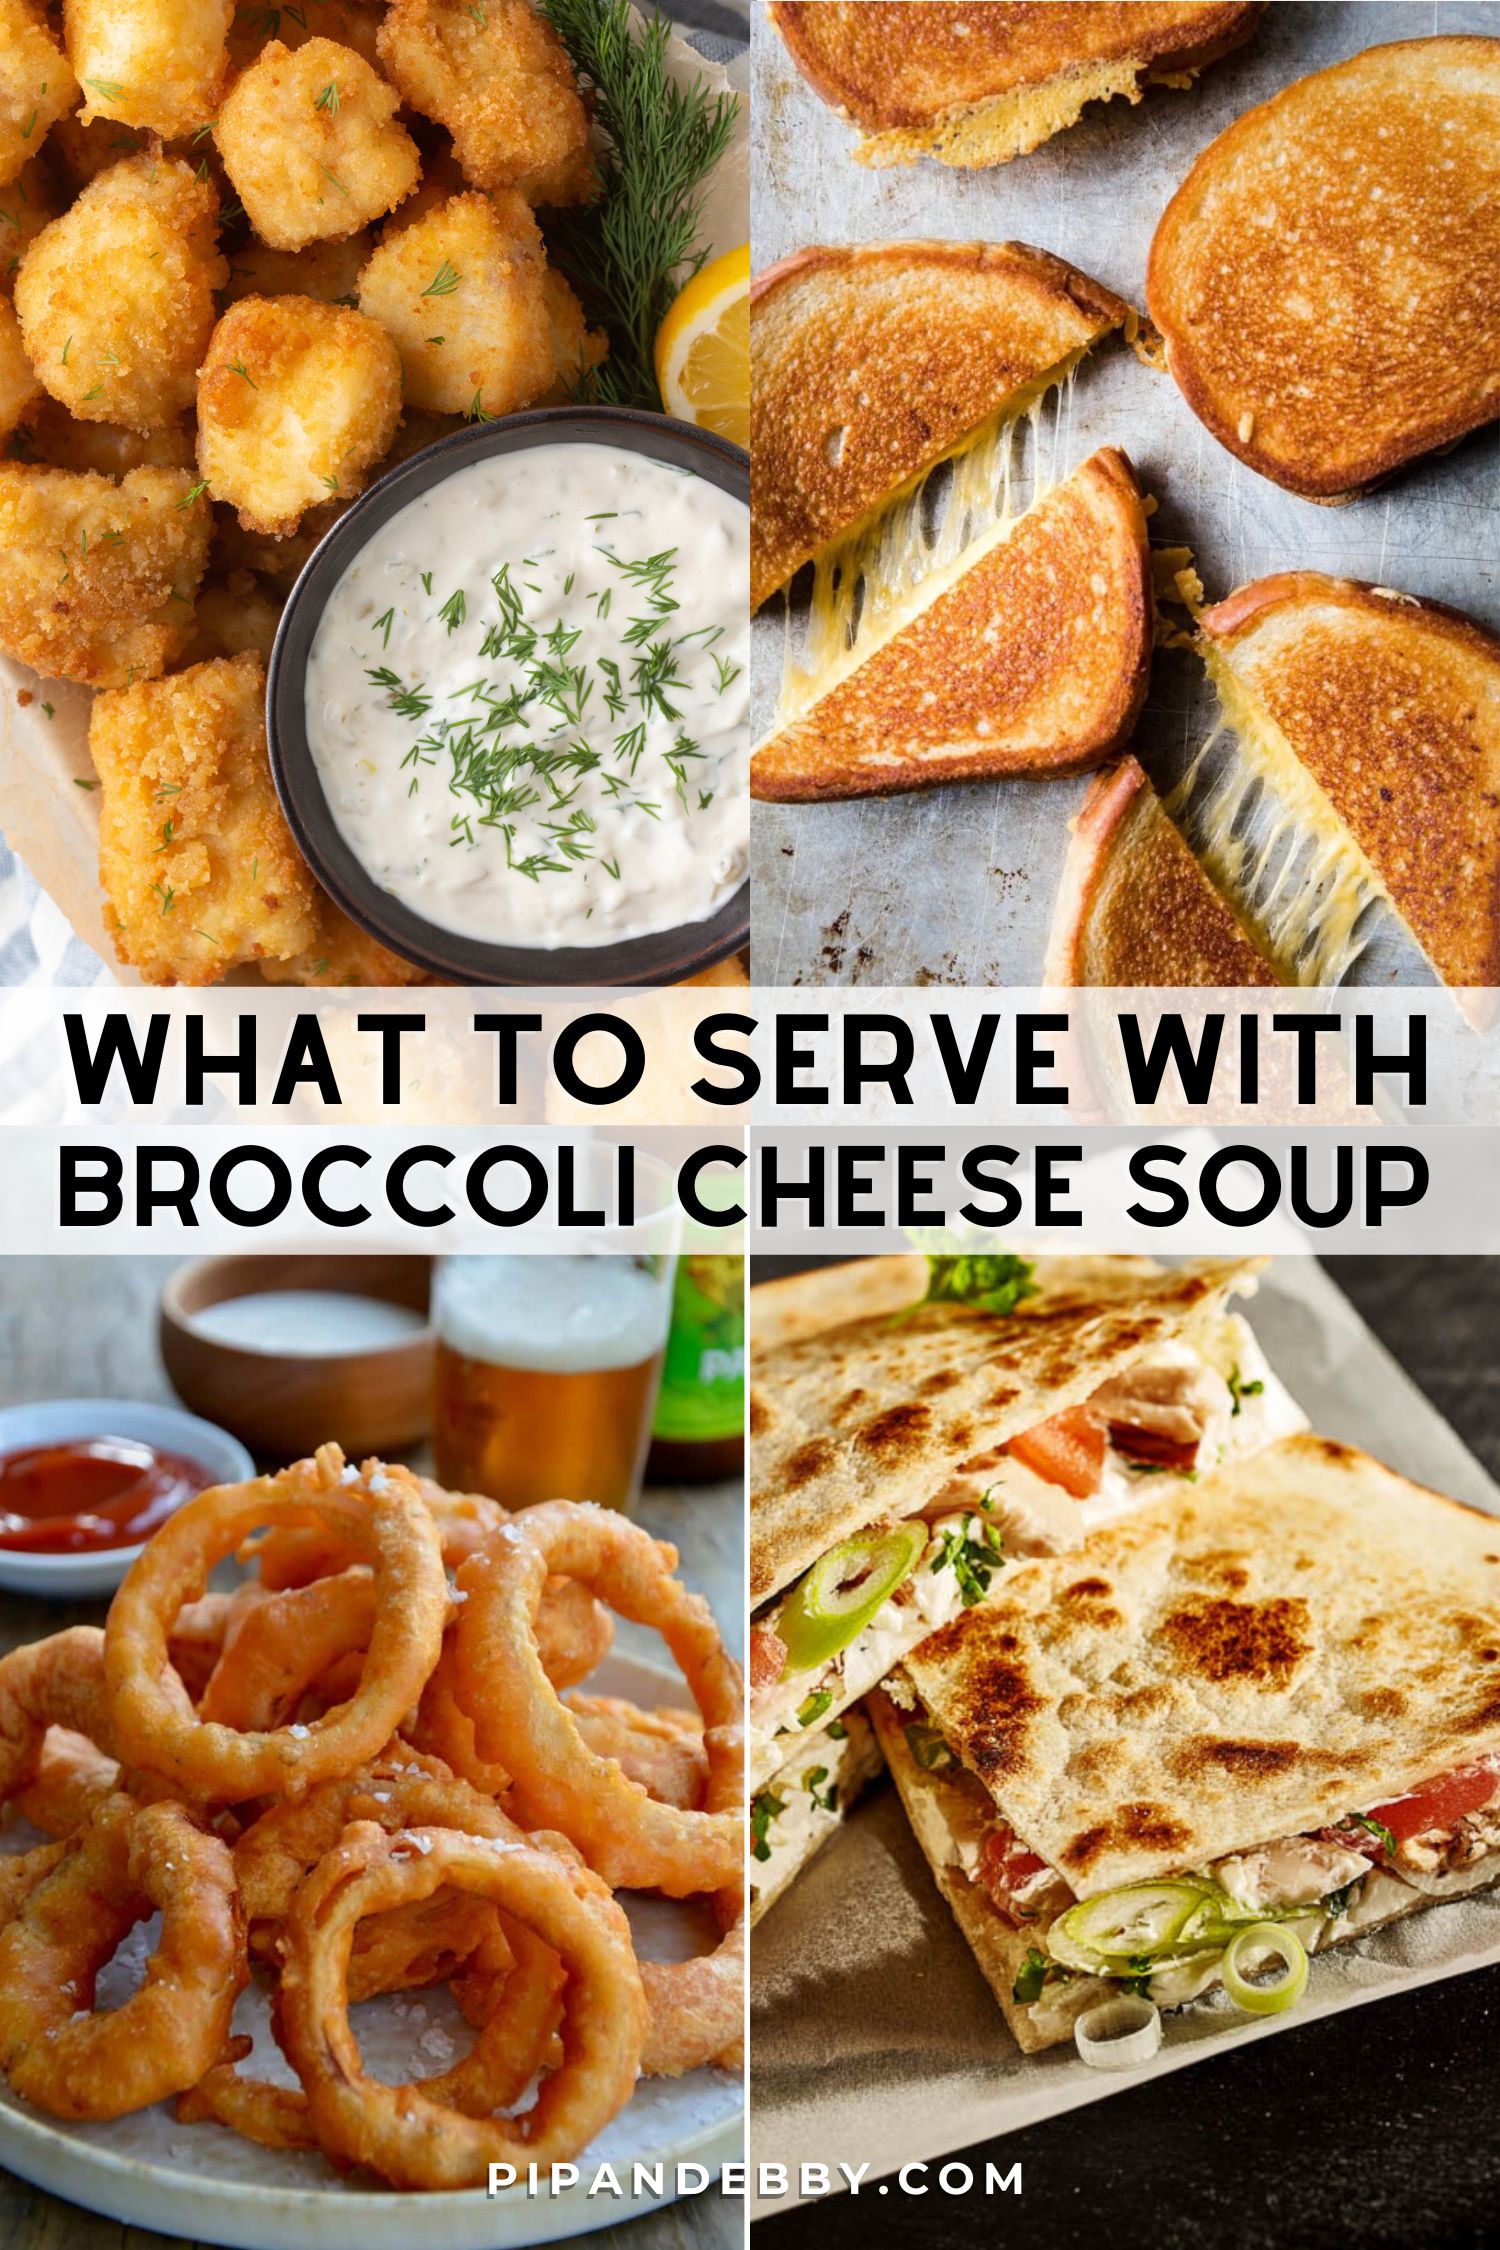 Four food photos in a grid with text overlay reading, "What to serve with broccoli cheese soup."